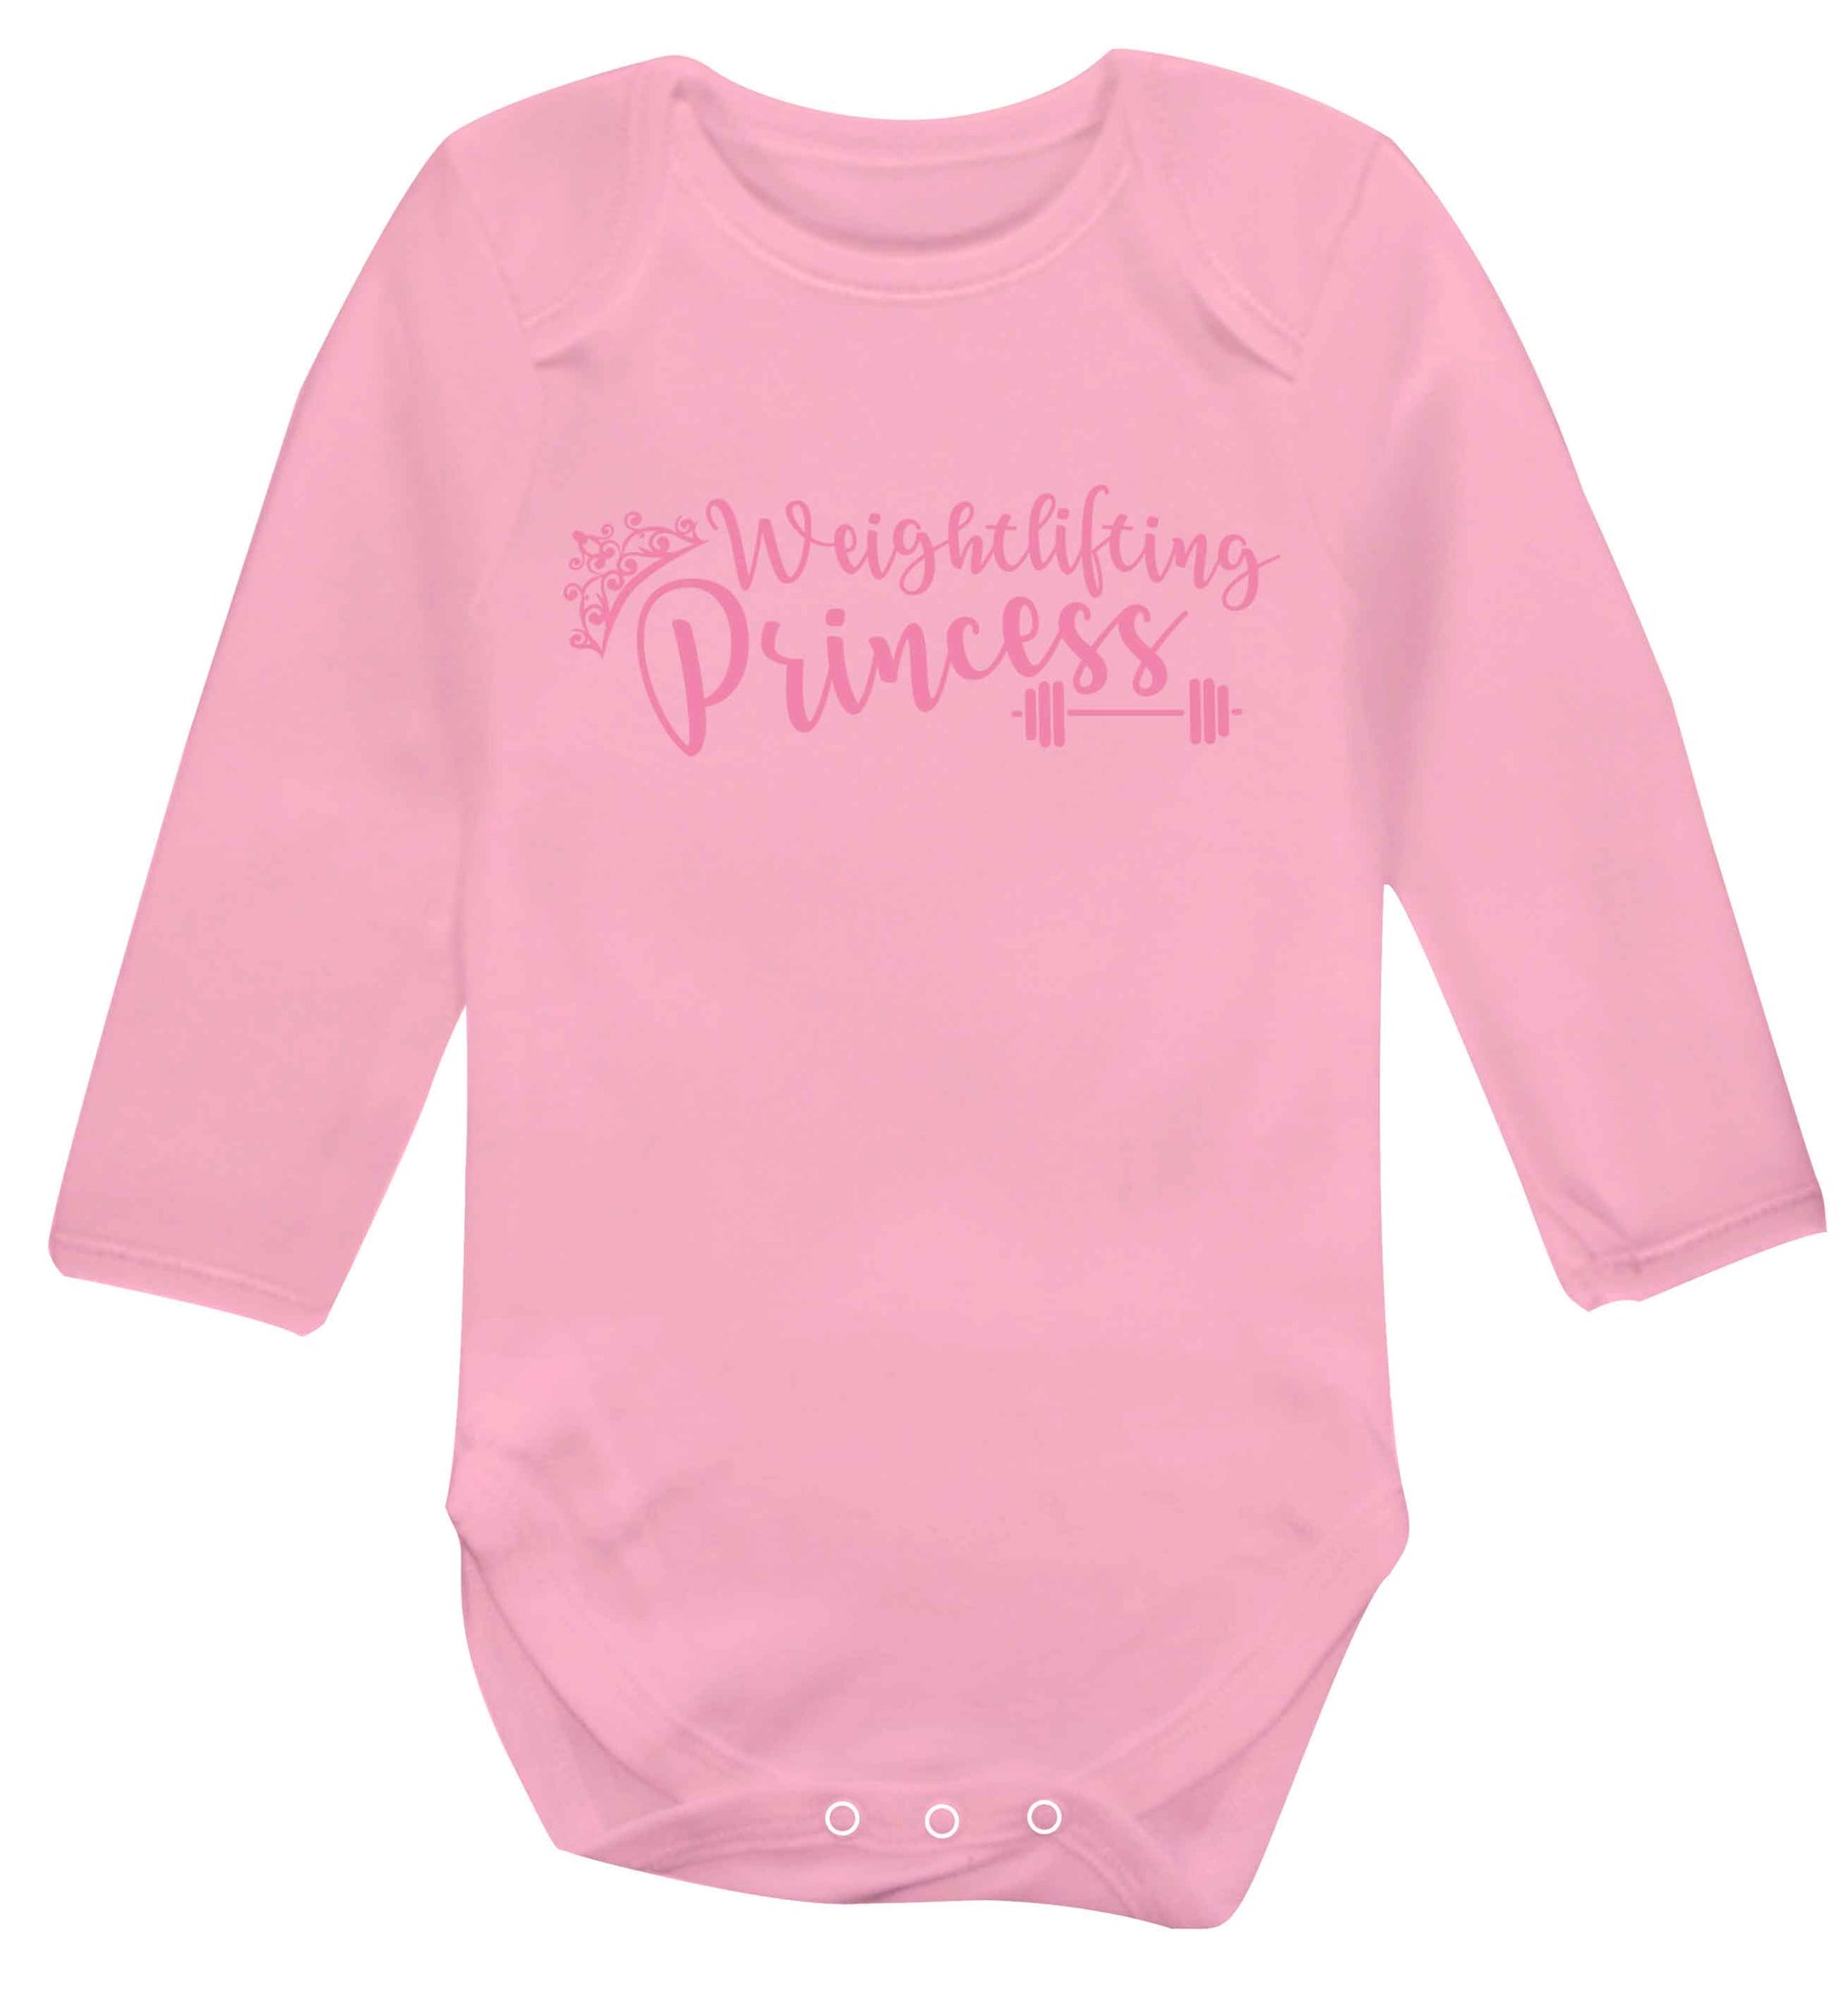 Weightlifting princess Baby Vest long sleeved pale pink 6-12 months